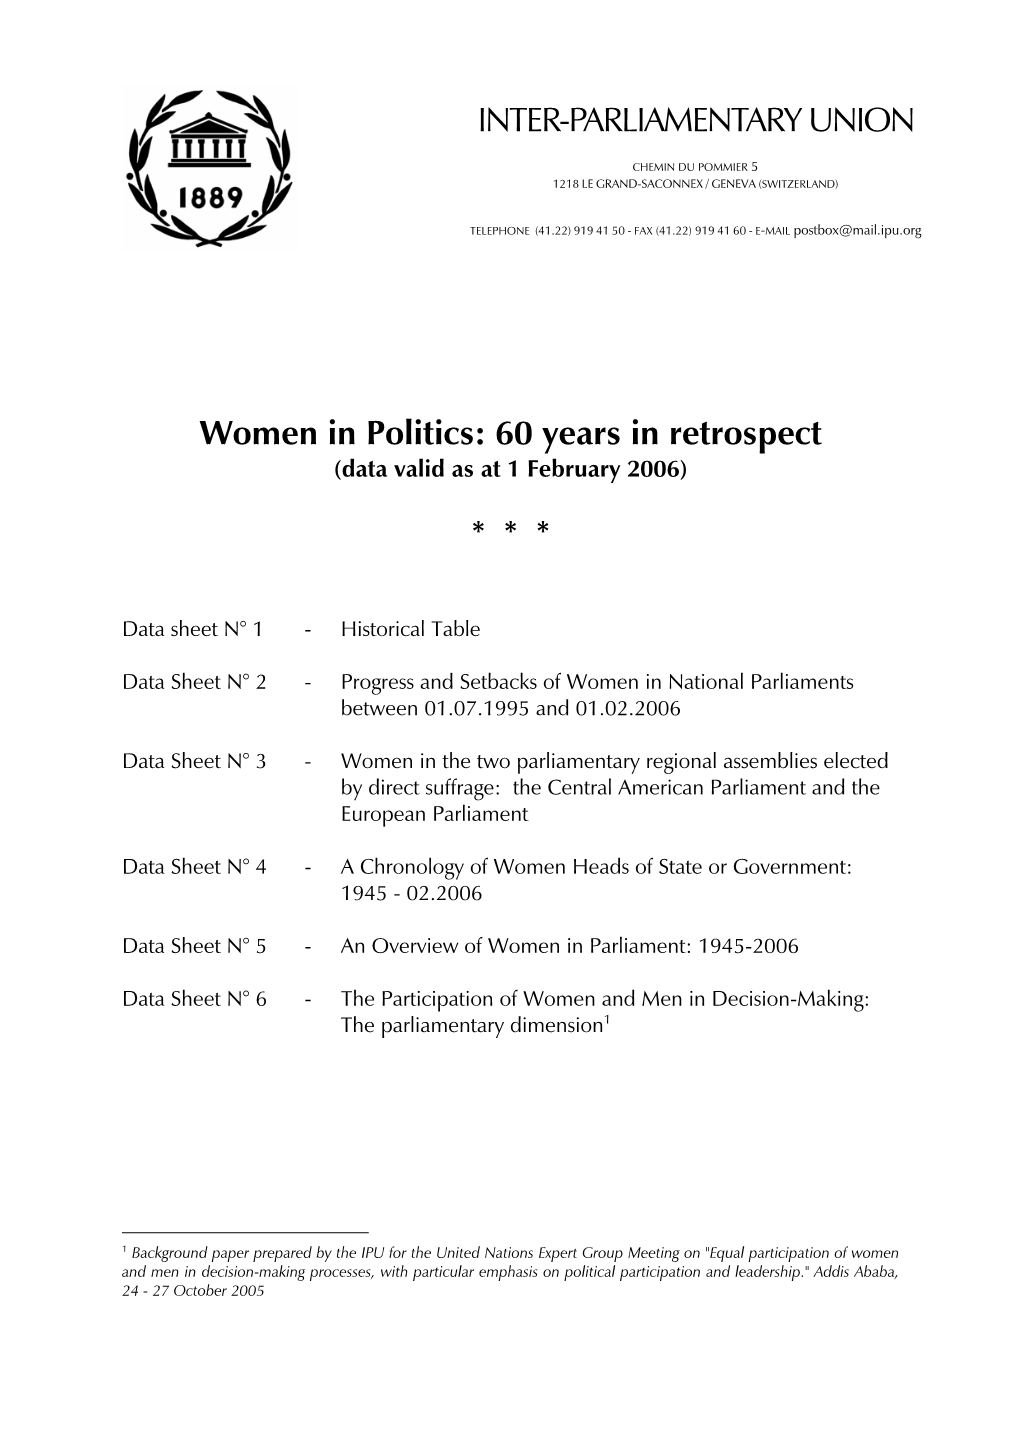 Women in Politics: 60 Years in Retrospect (Data Valid As at 1 February 2006)